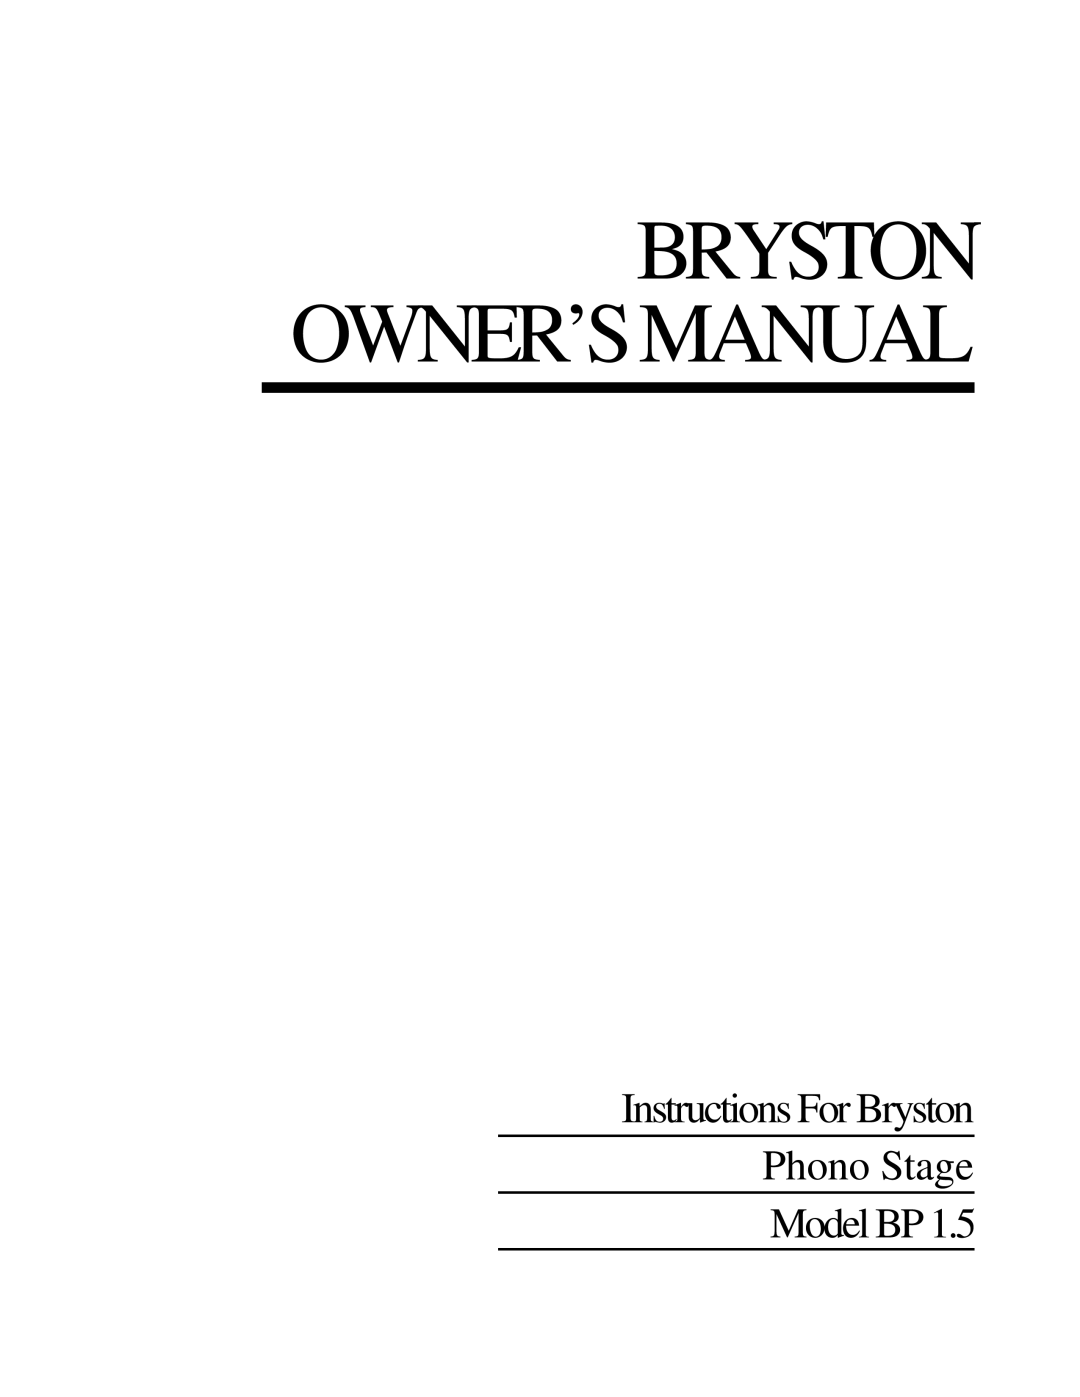 Bryston BP 1.5 owner manual Bryston Owner’Smanual, Instructions For Bryston Phono Stage Model BP 